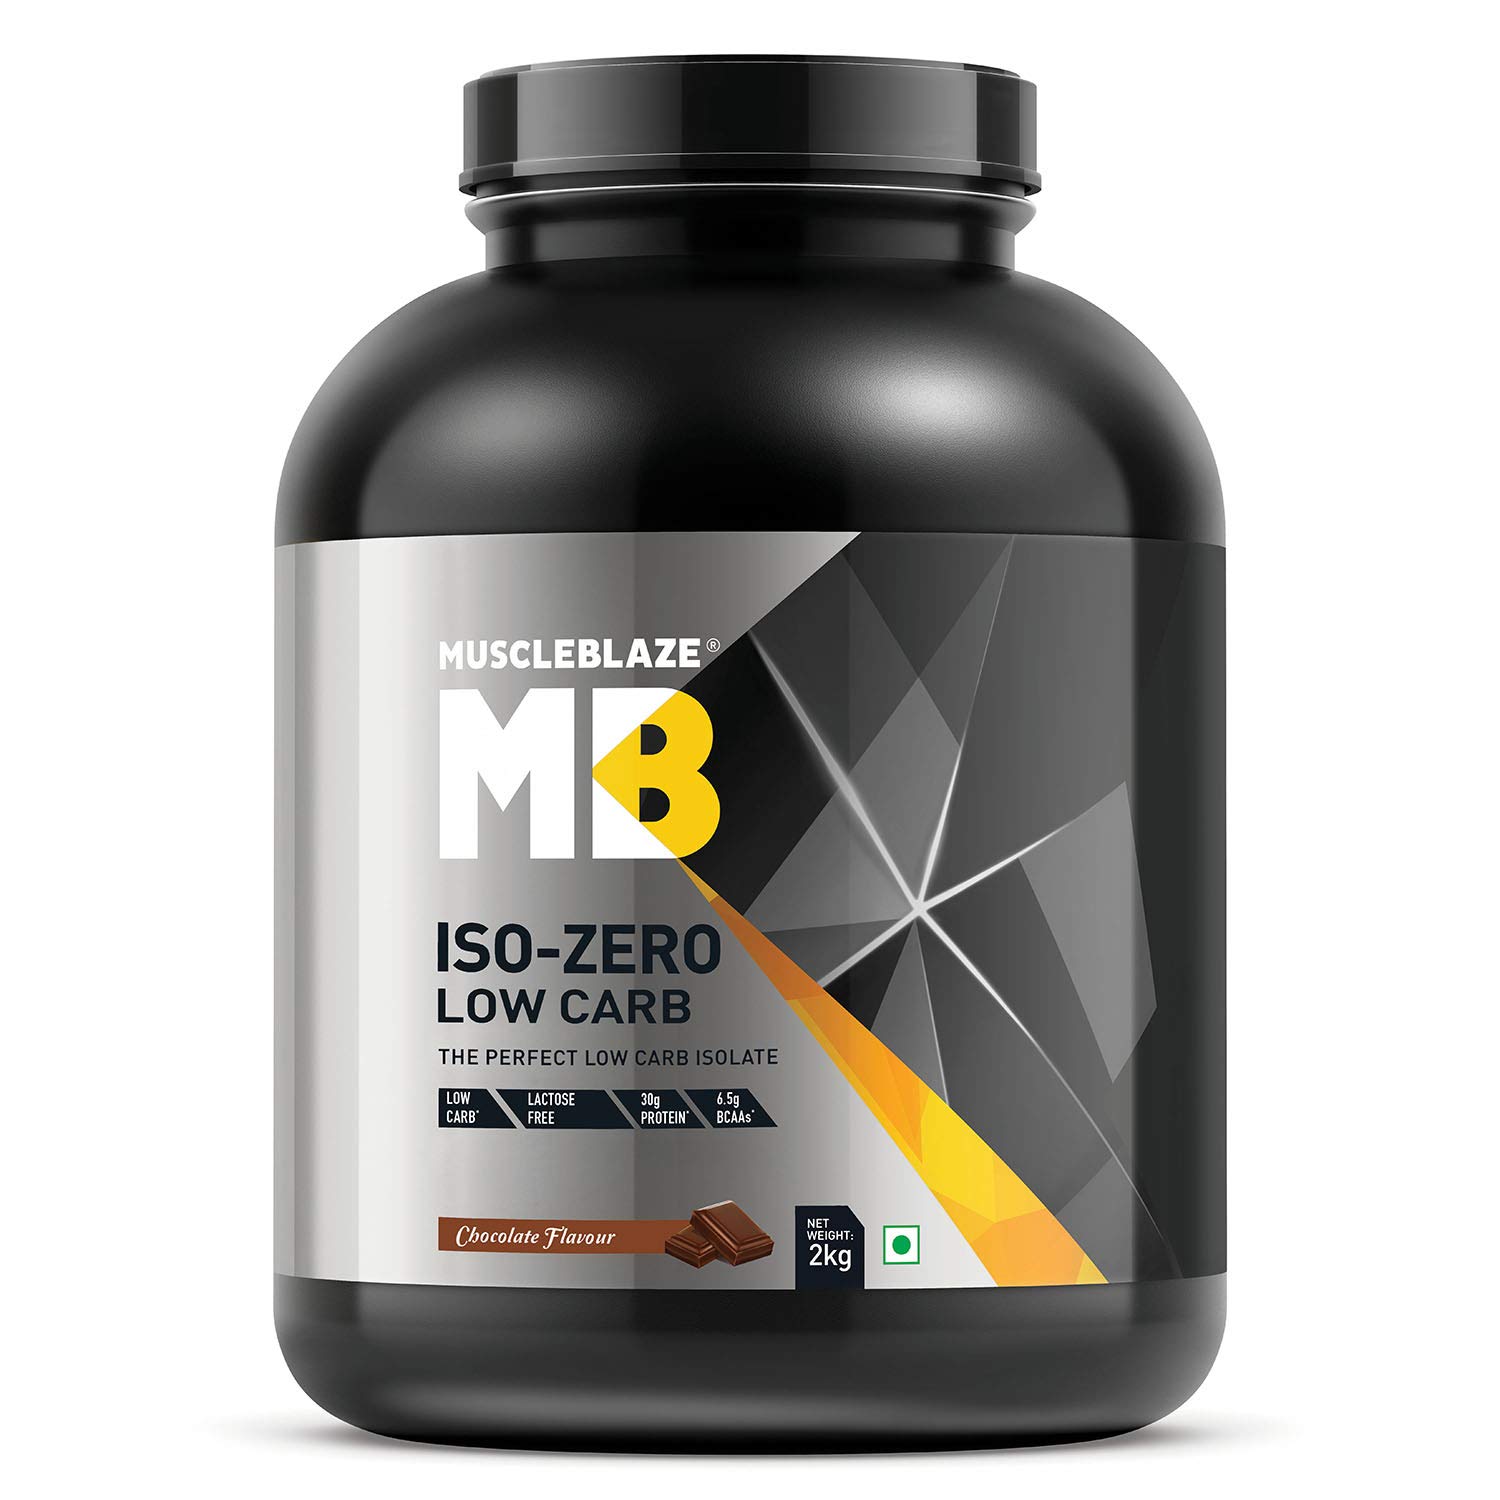 Image Of Muscleblaze Iso-Zero Low Carb Whey Protein Isolate Beast Nutrition